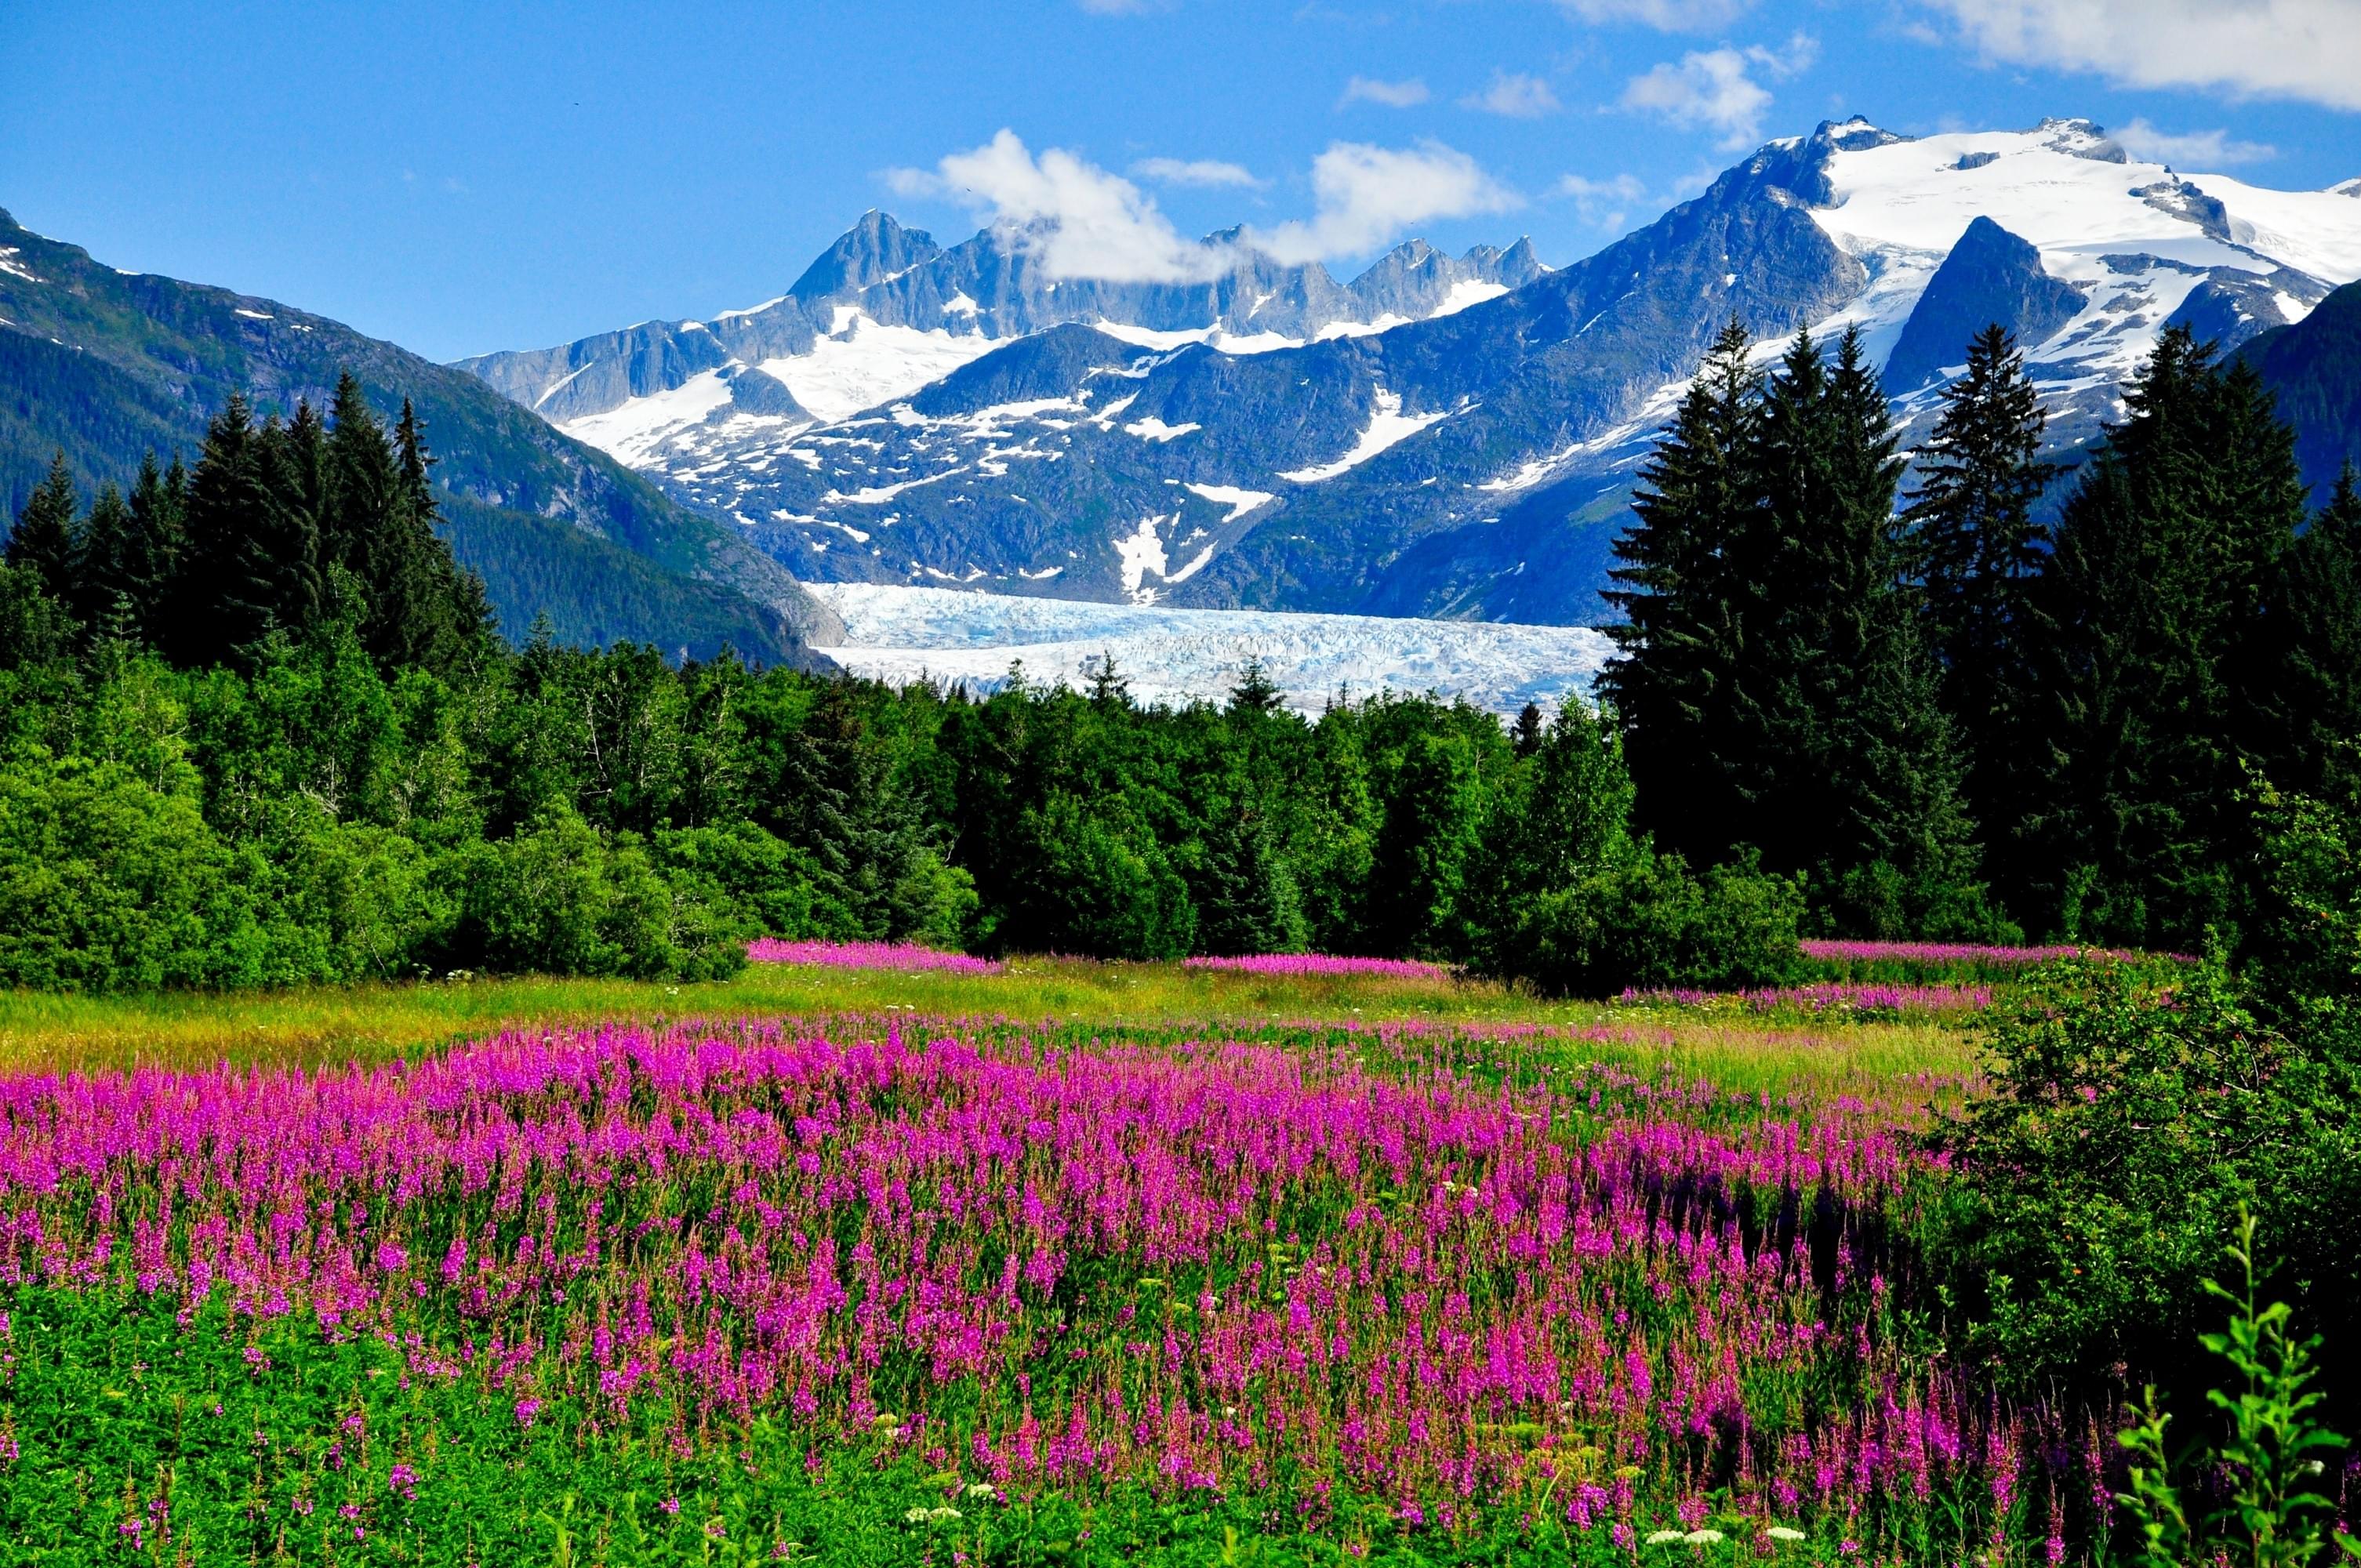 Things to Do in Alaska